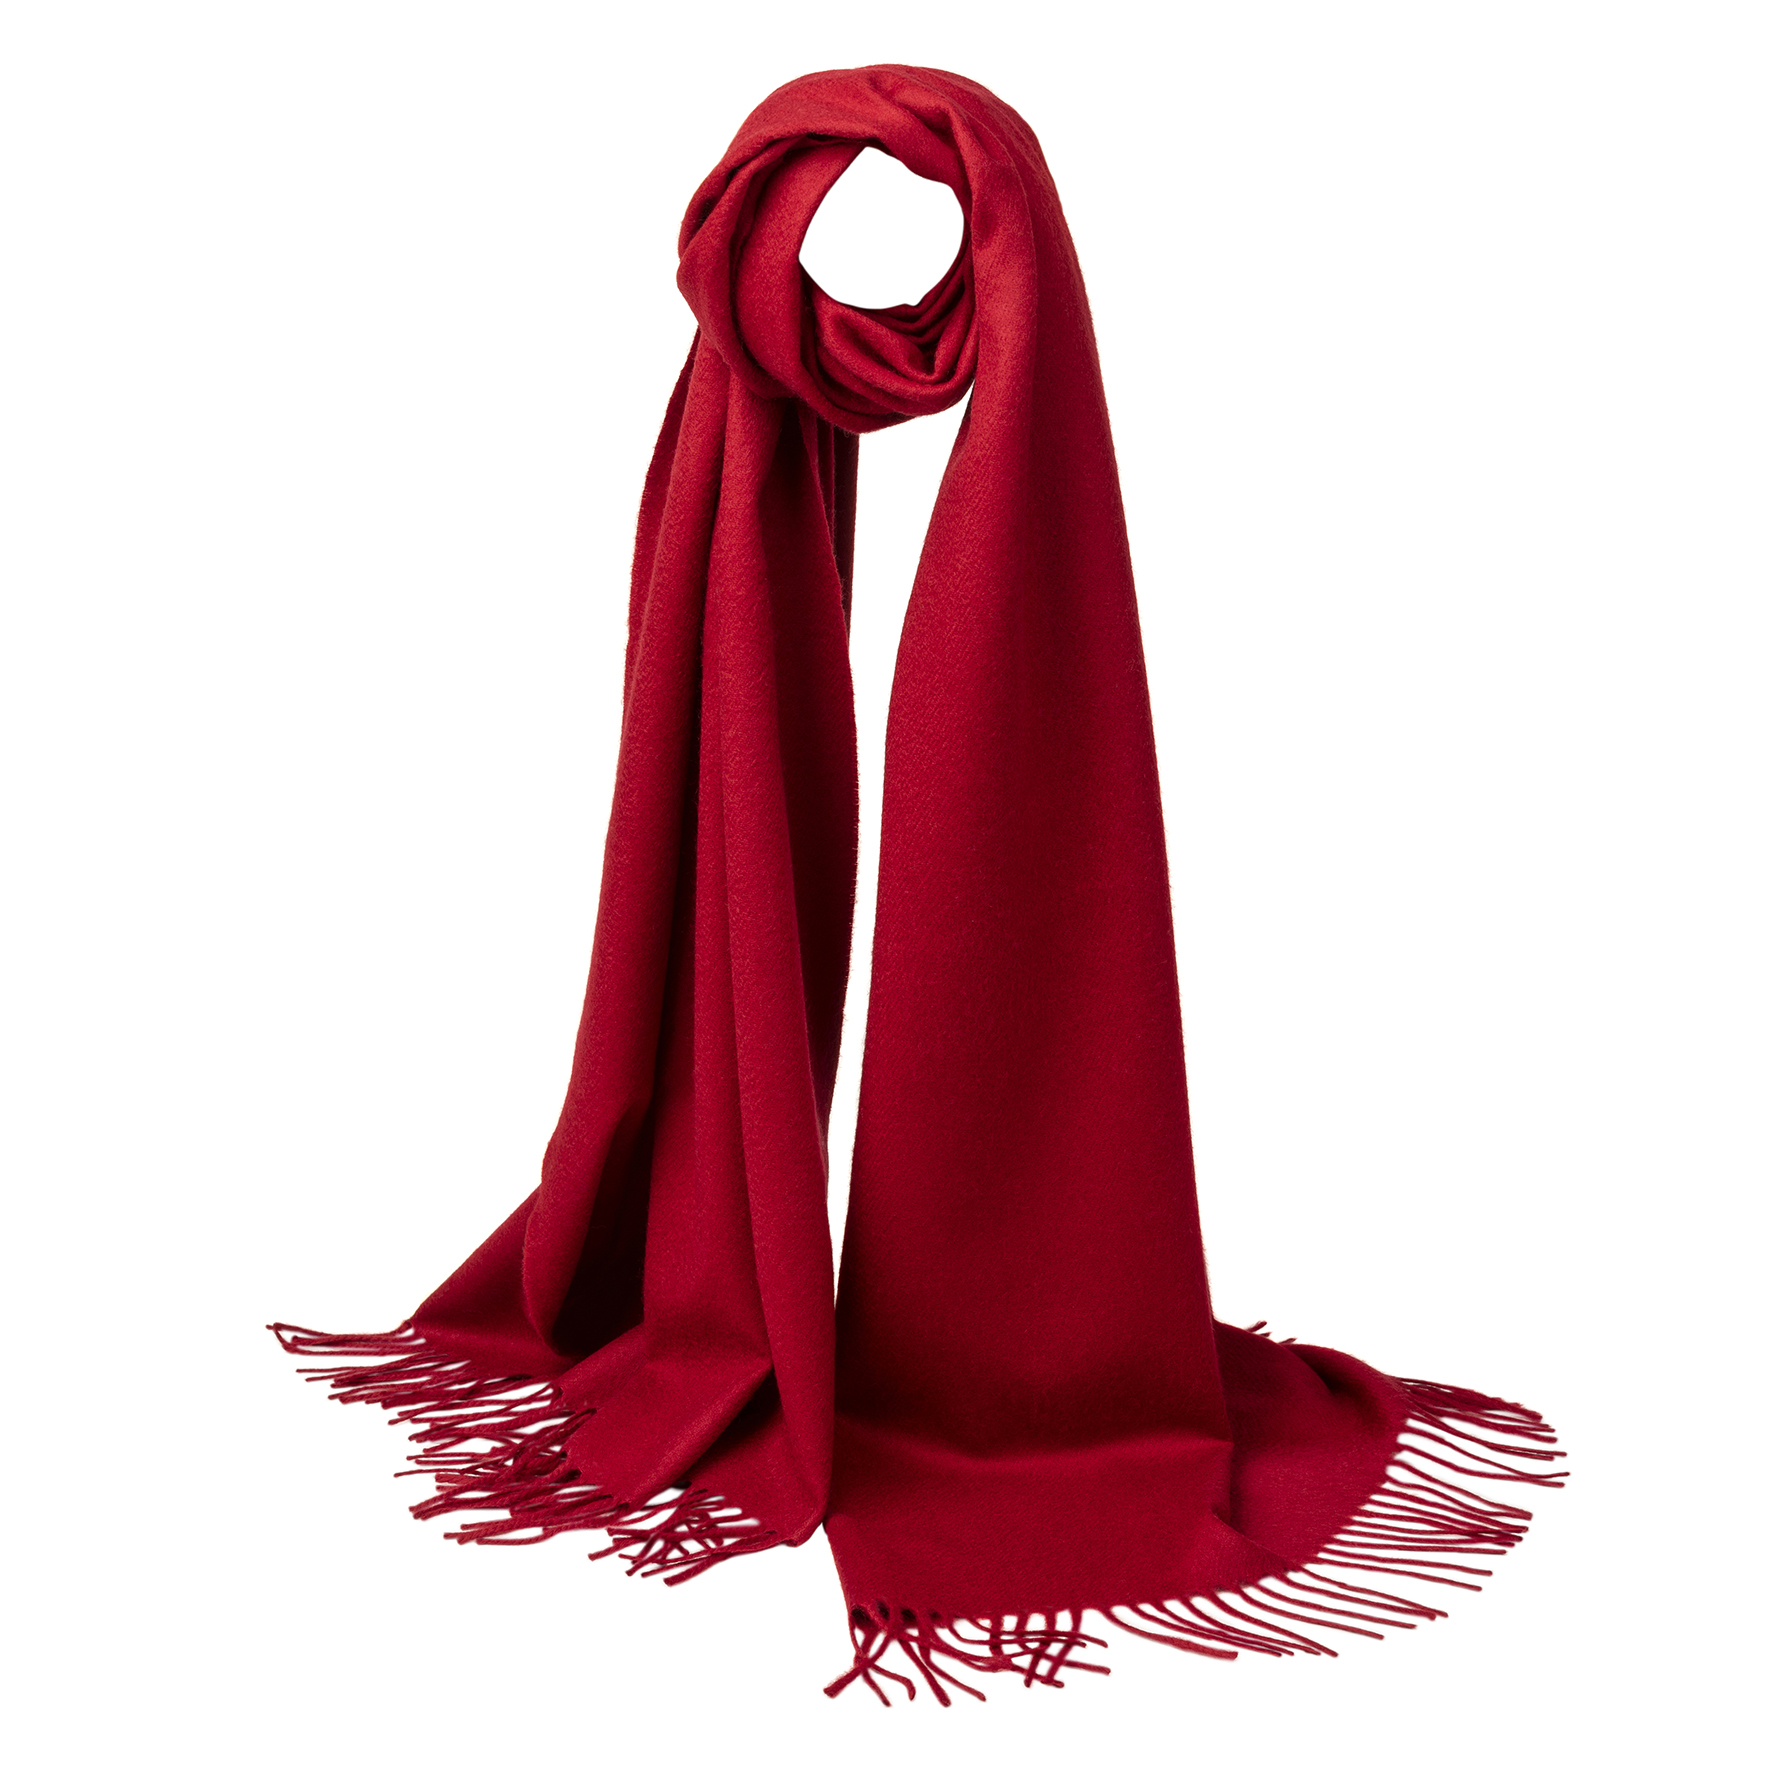 Callan Old Red Cashmere Stole